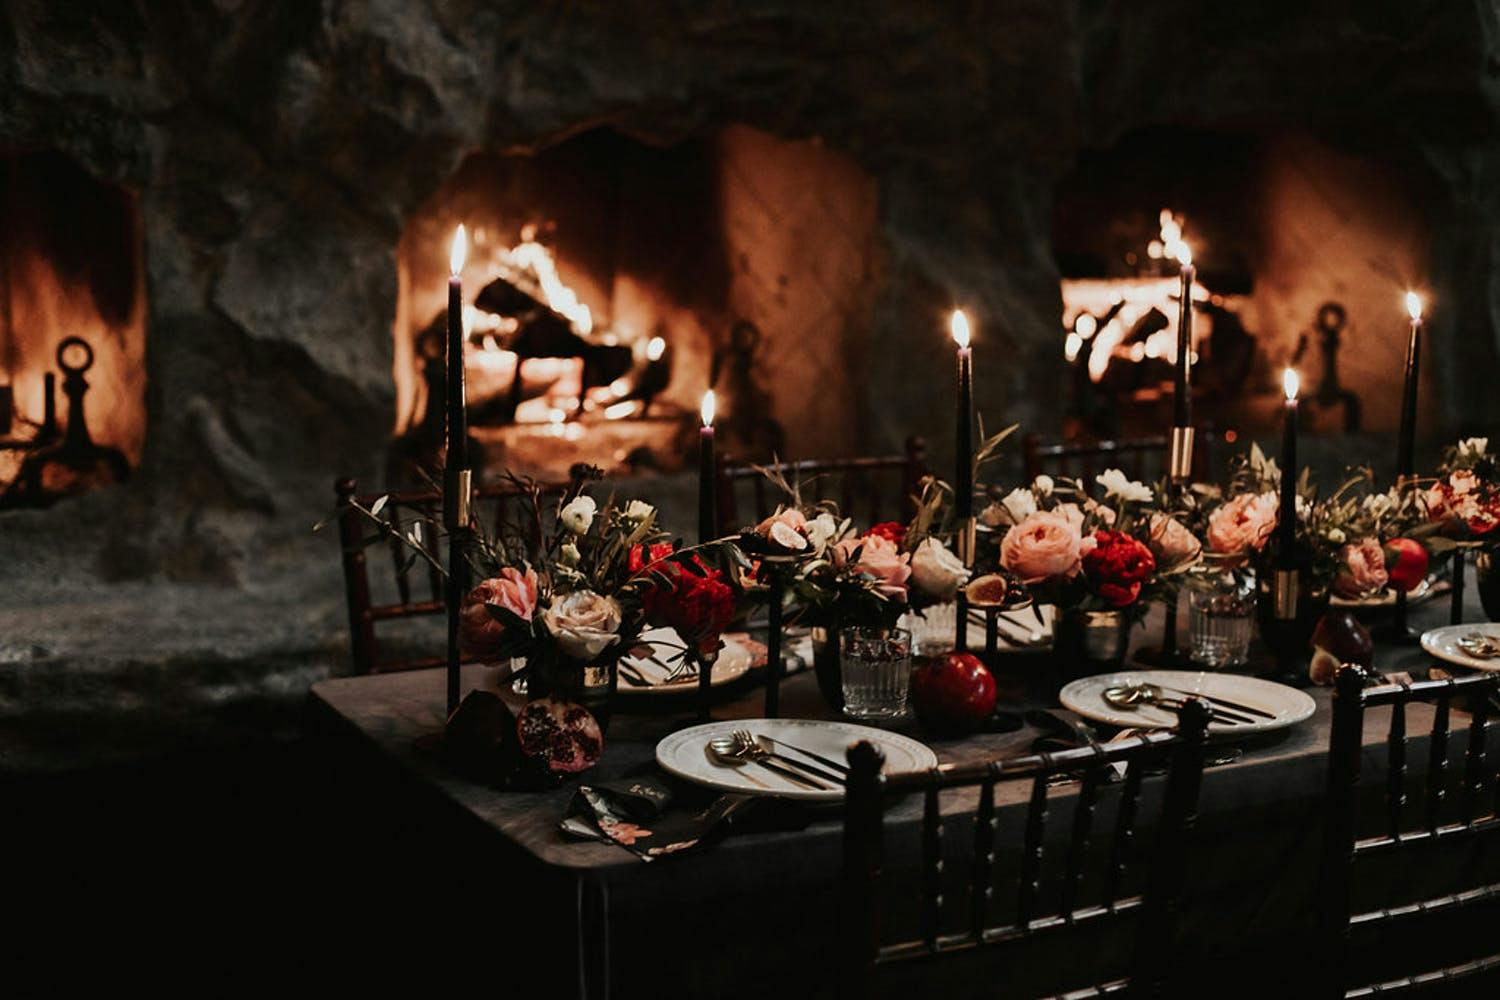 Candlelit winter wedding table with roses and black tapered candles set against consecutive fireplaces | PartySlate